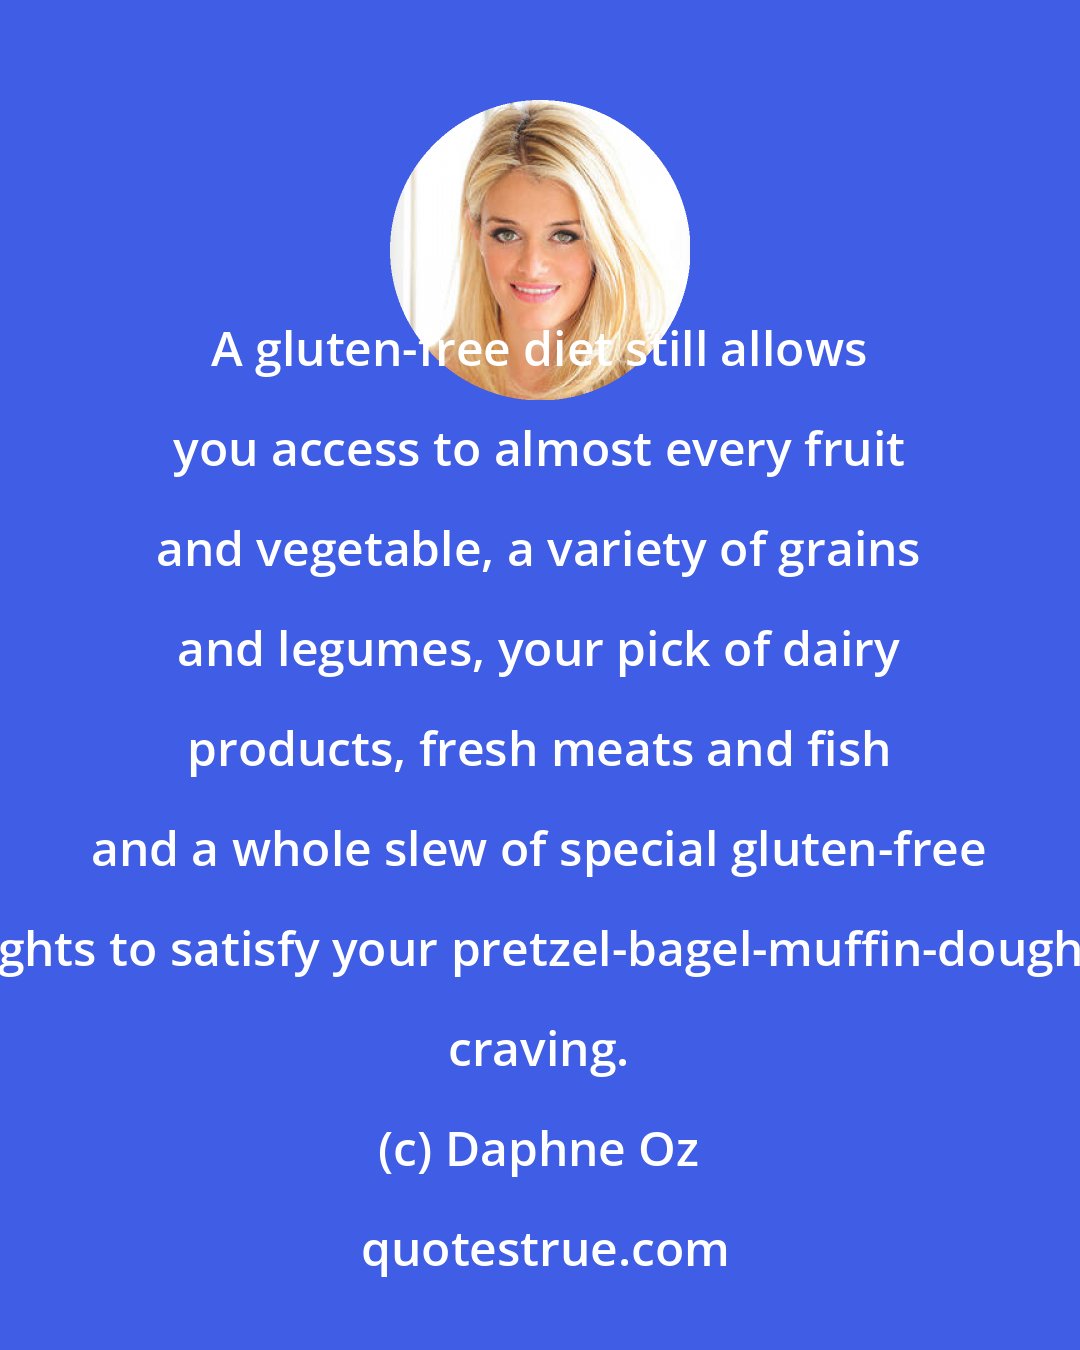 Daphne Oz: A gluten-free diet still allows you access to almost every fruit and vegetable, a variety of grains and legumes, your pick of dairy products, fresh meats and fish and a whole slew of special gluten-free delights to satisfy your pretzel-bagel-muffin-doughnut craving.